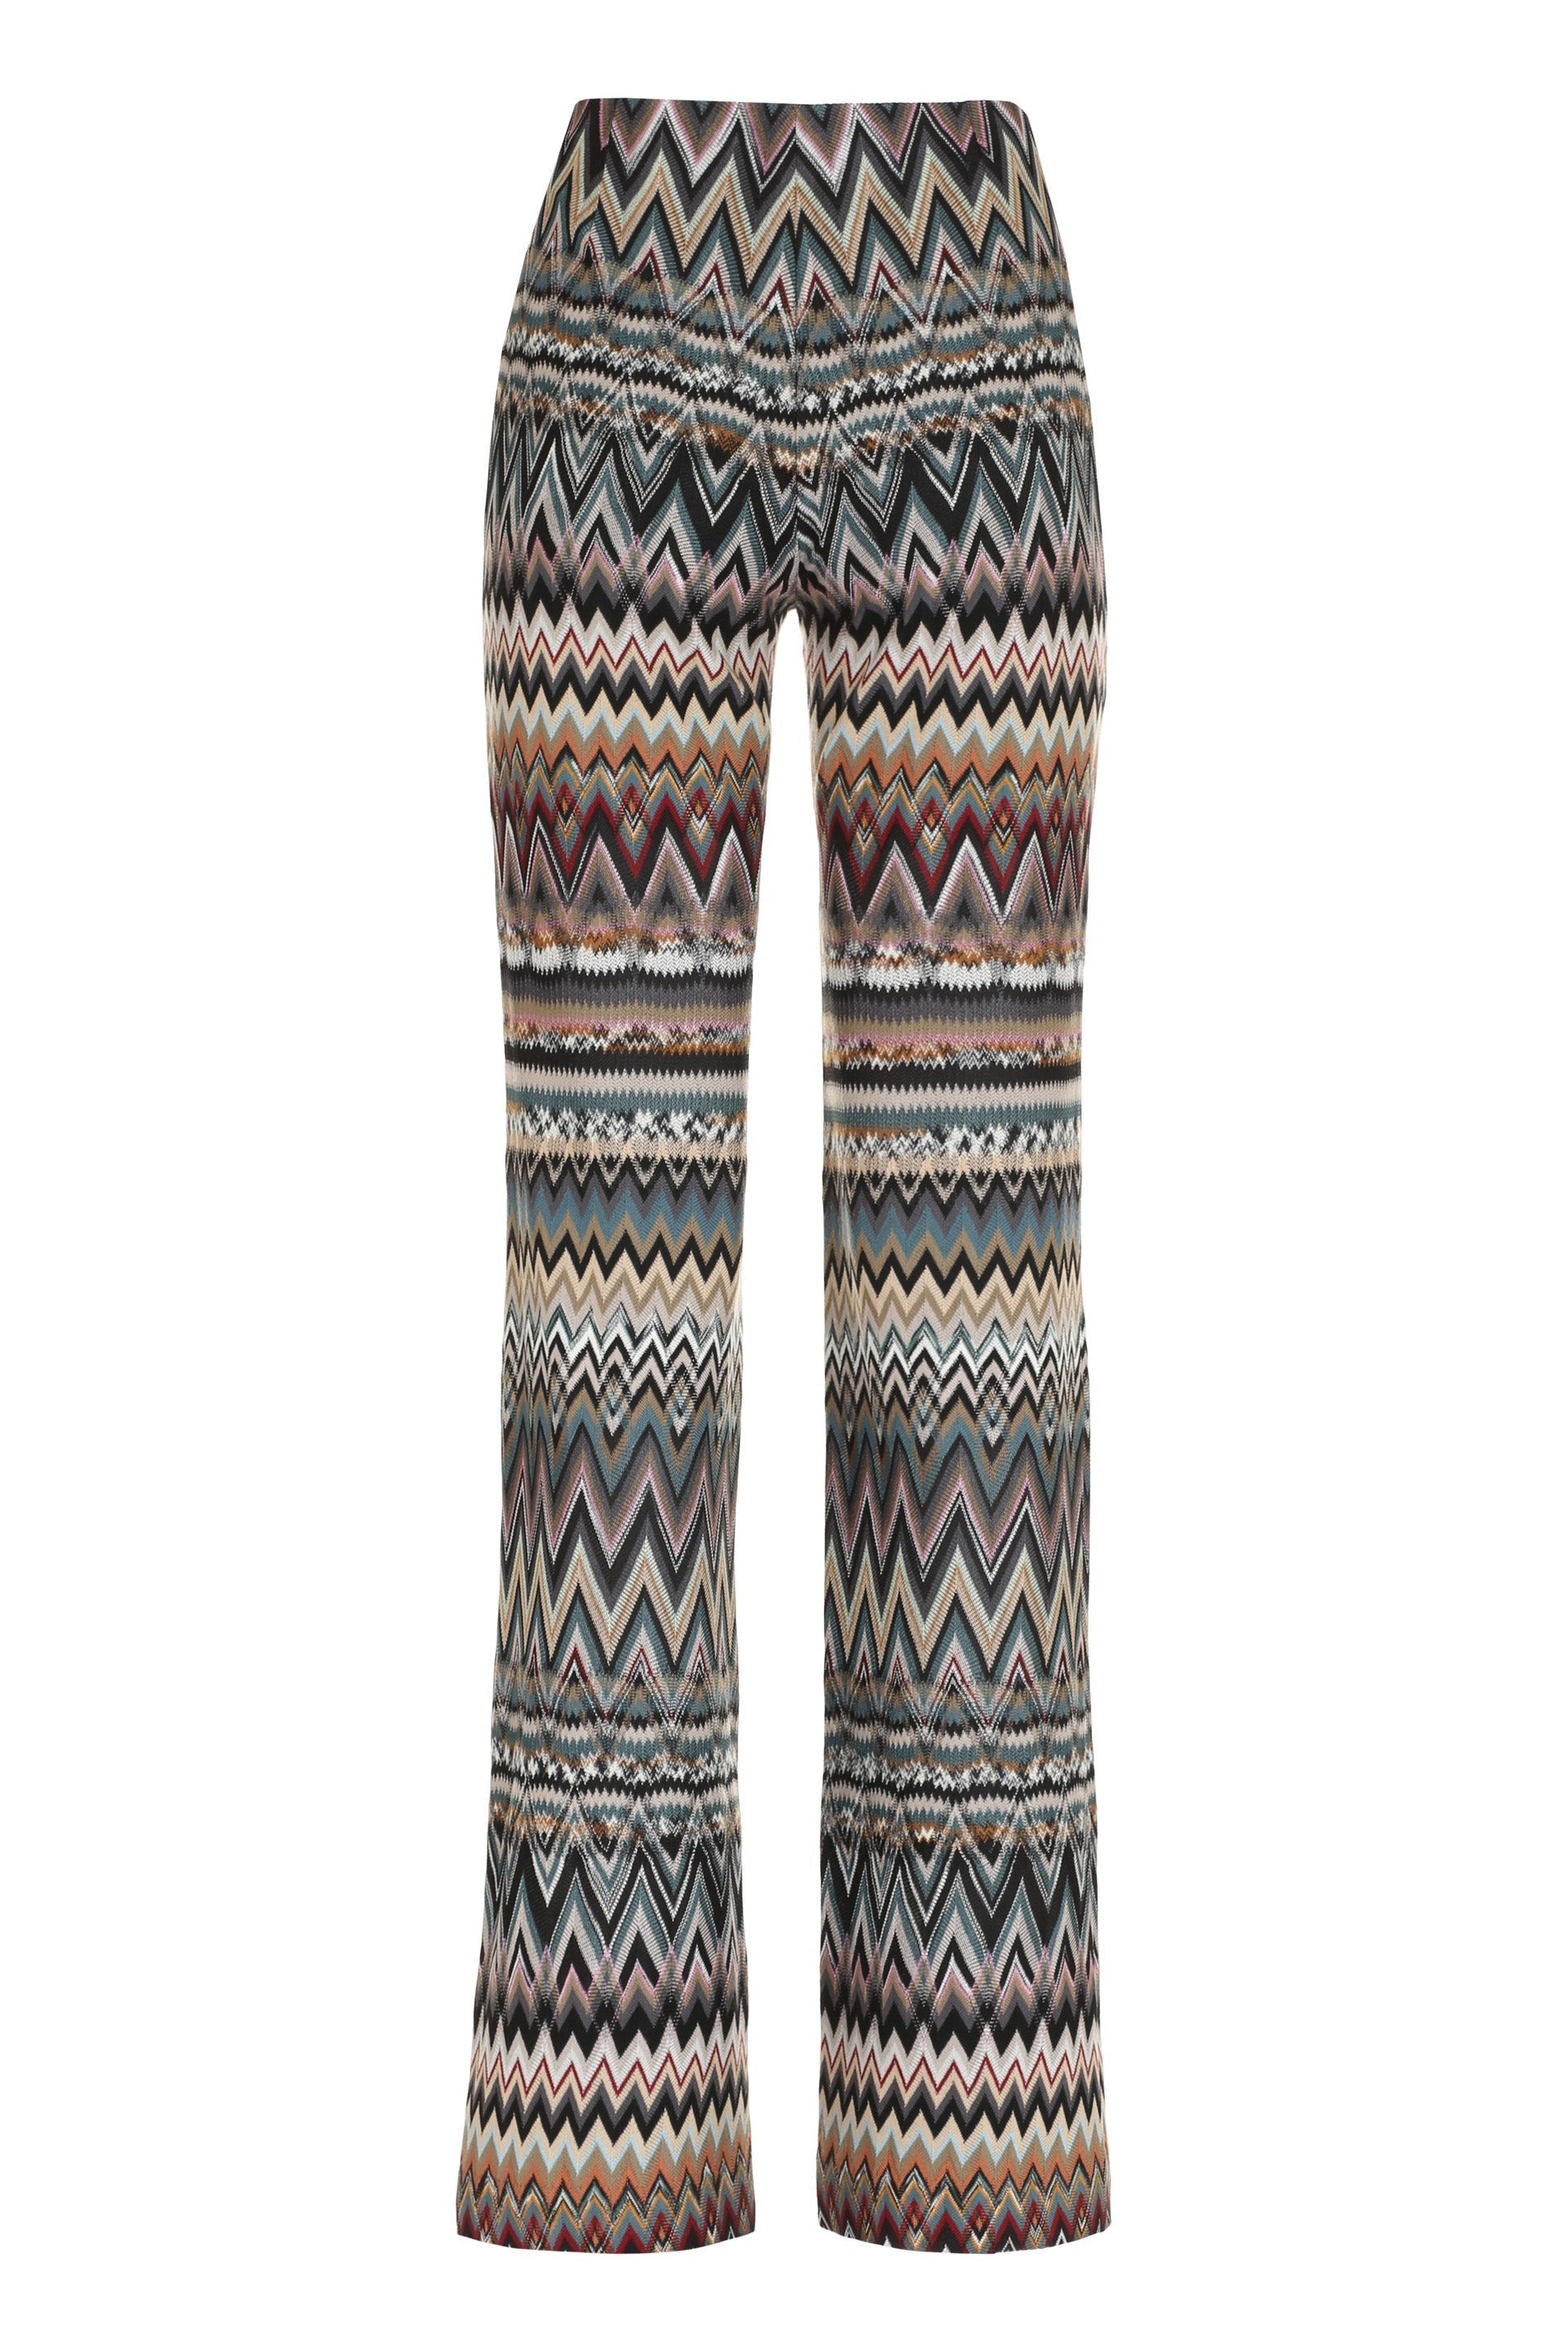 Chevron knitted palazzo trousers-Missoni-OUTLET-SALE-ARCHIVIST